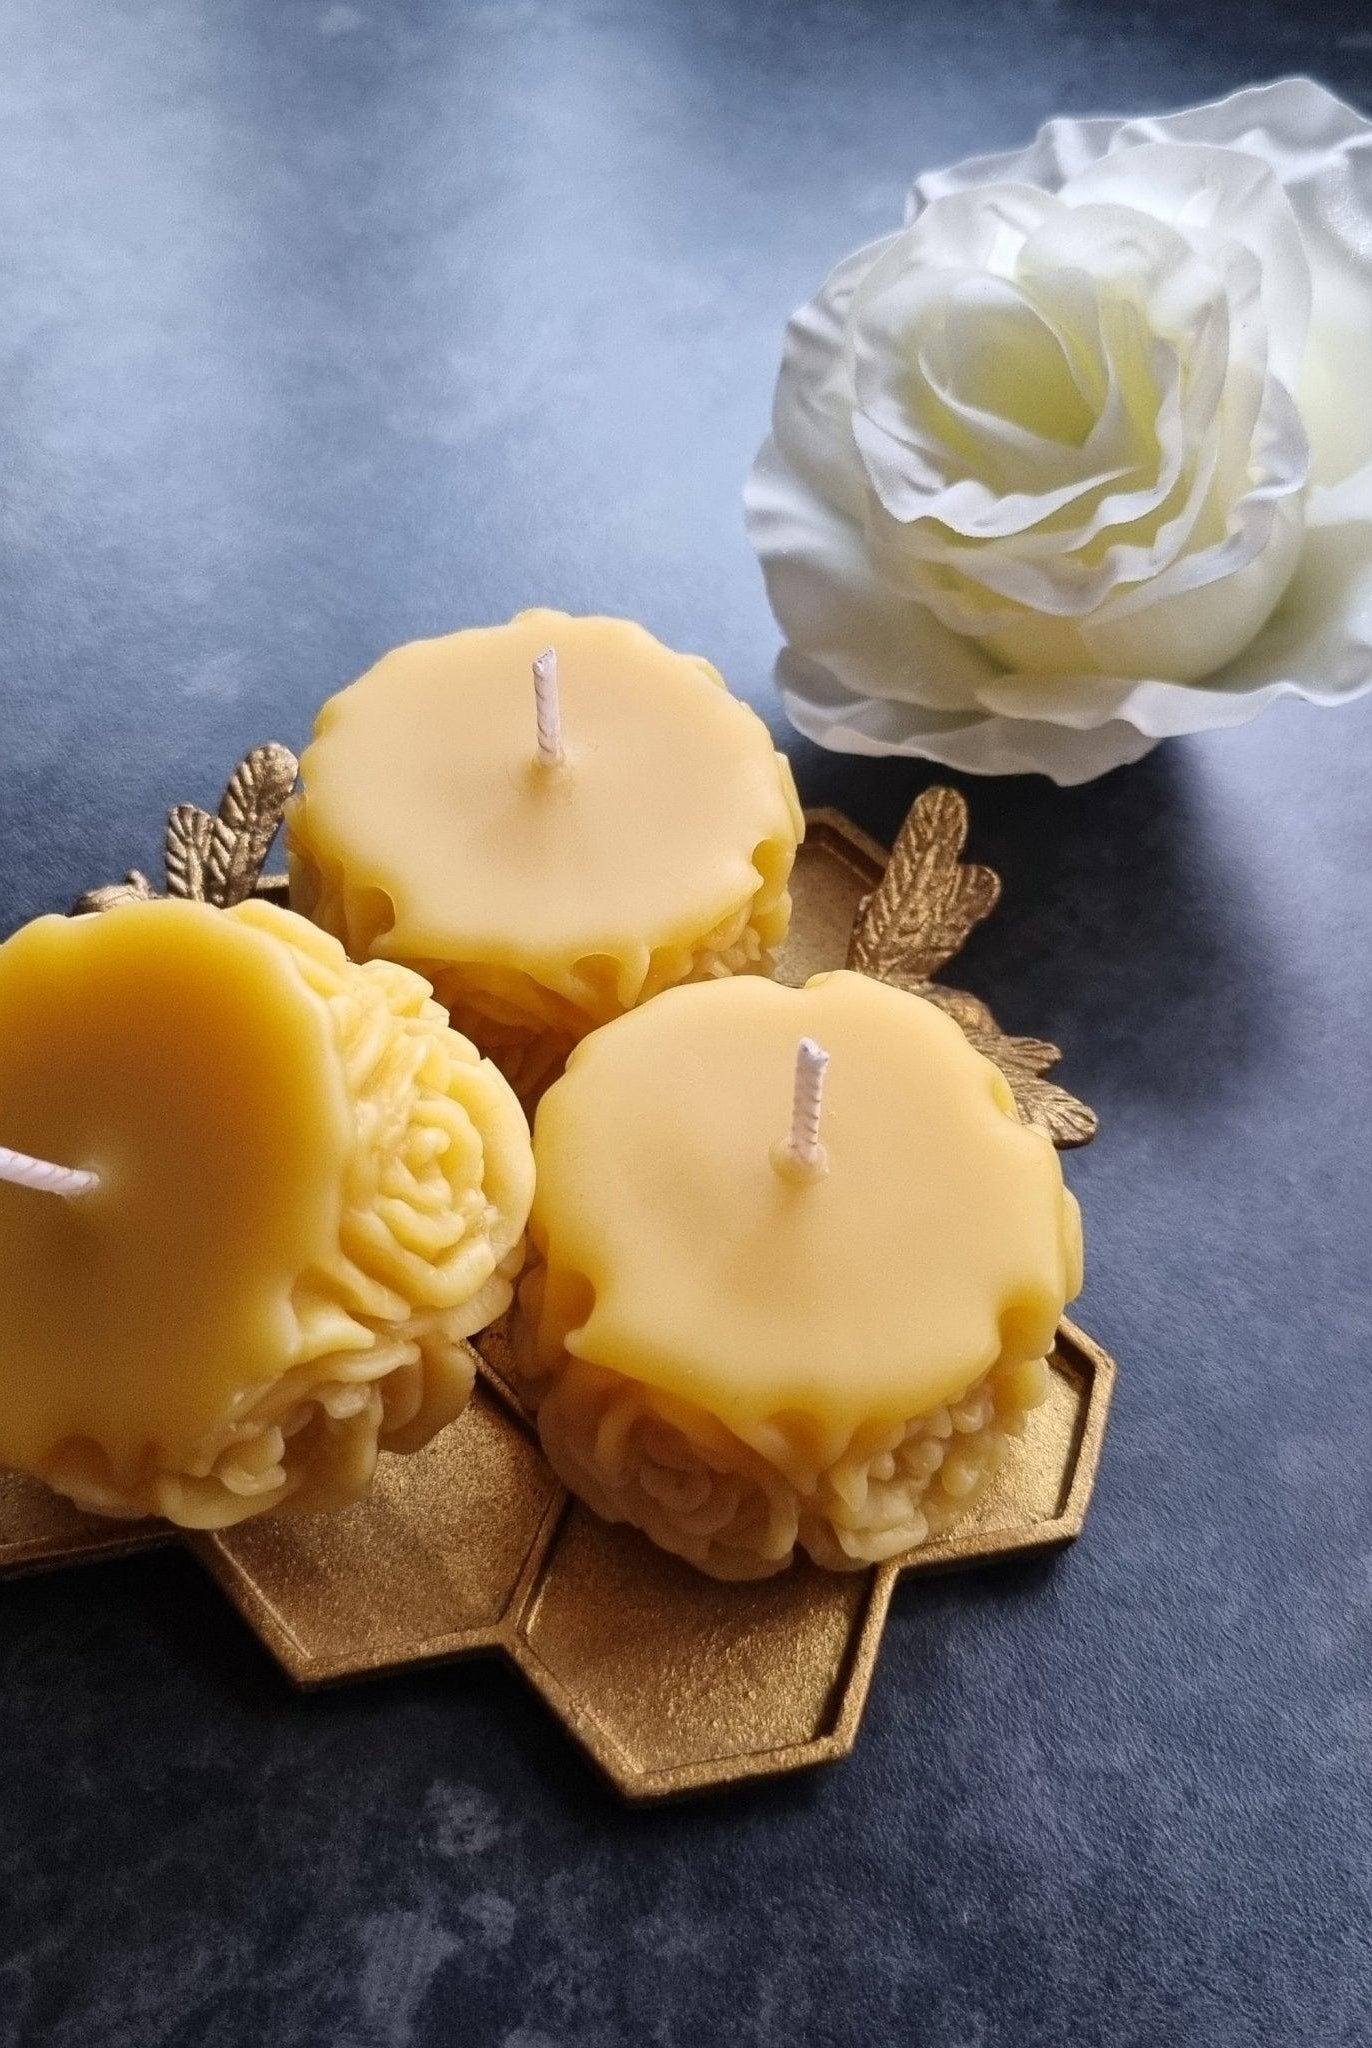 Set of 3 Pure Beeswax Votive Candles with Elegant Rose Design | 1.6oz - Soulshinecreators - aesthetic candle